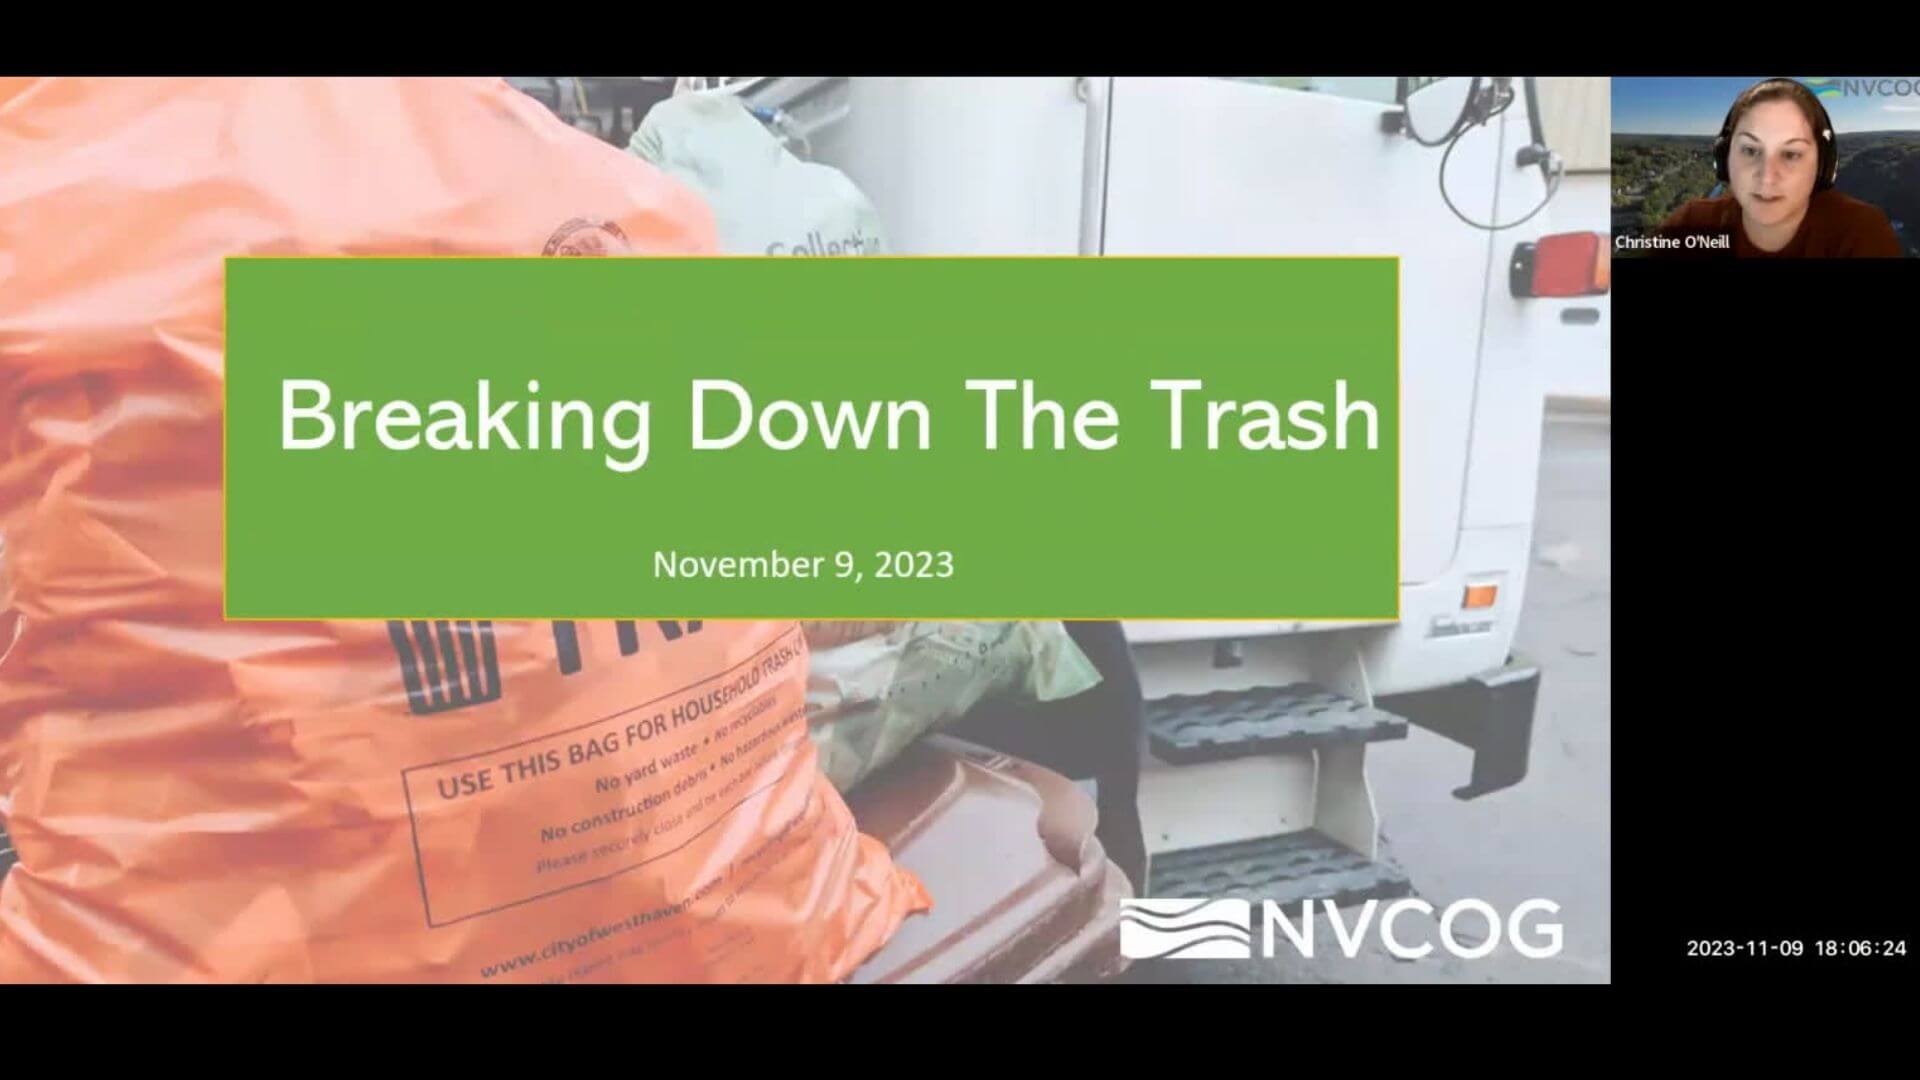 Behind The Scenes of The Middlebury Trash Reduction Pilot